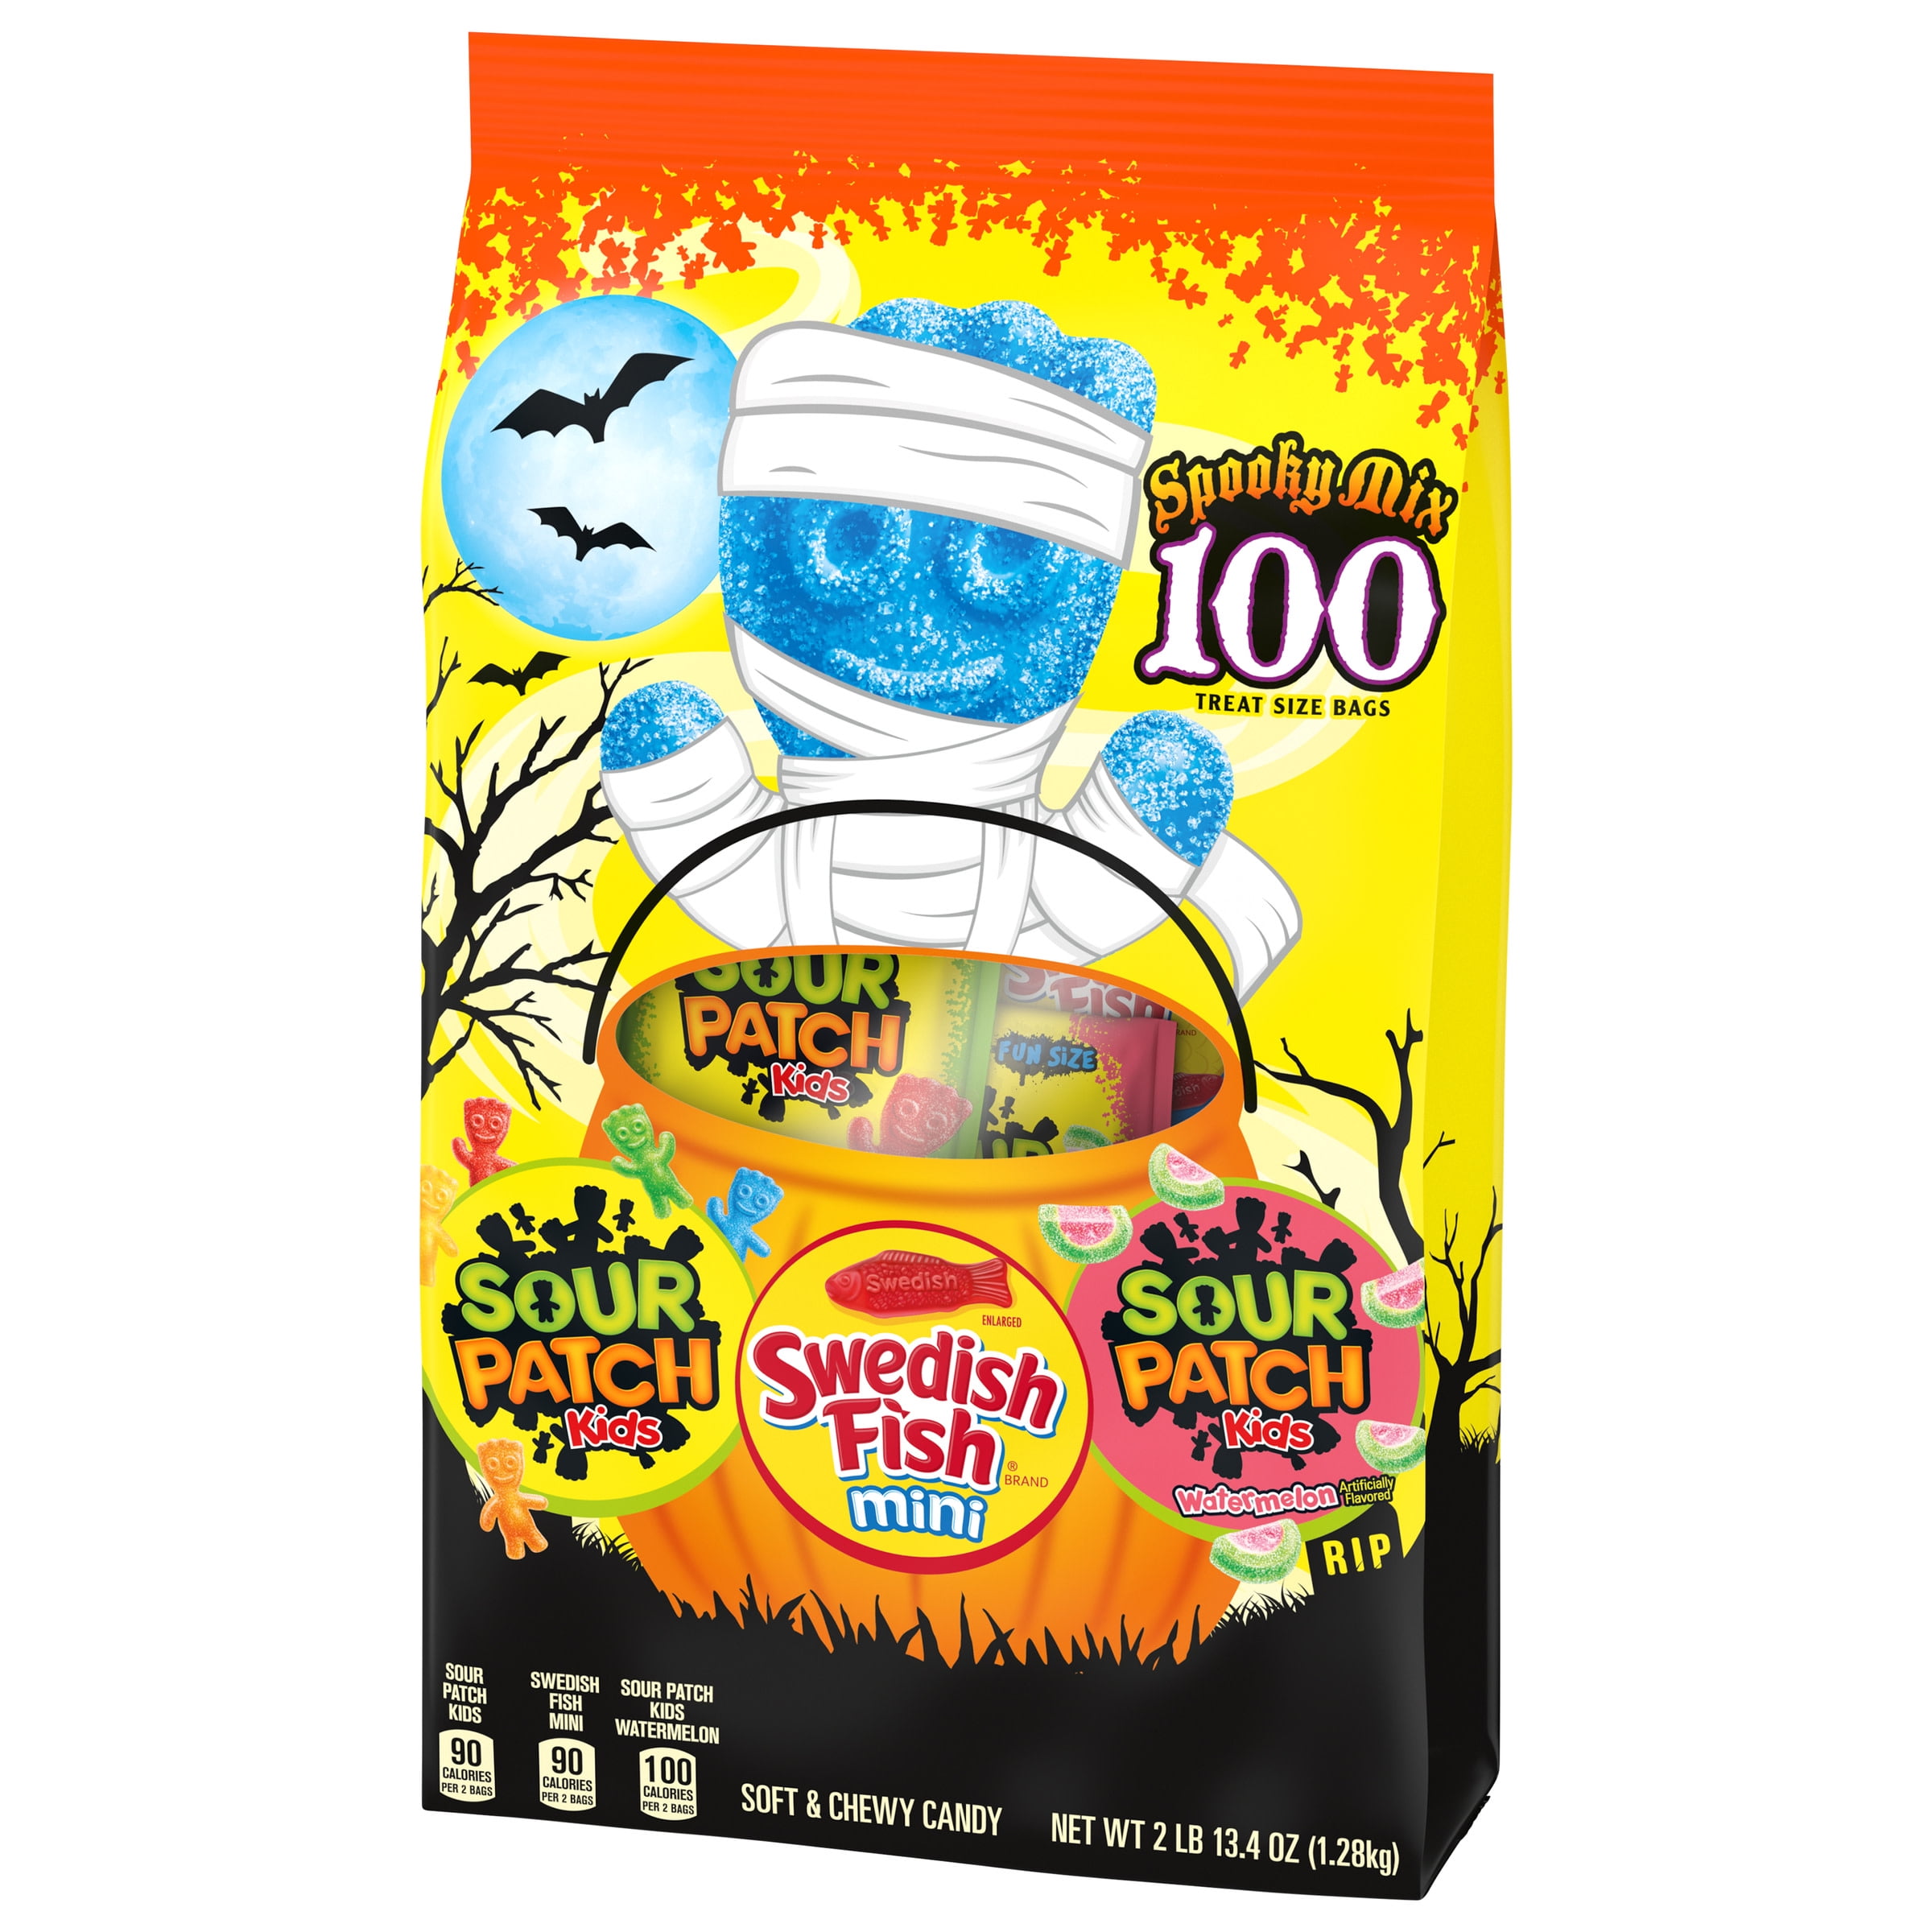 SOUR PATCH KIDS & SWEDISH FISH Mini Halloween Candy Variety Pack